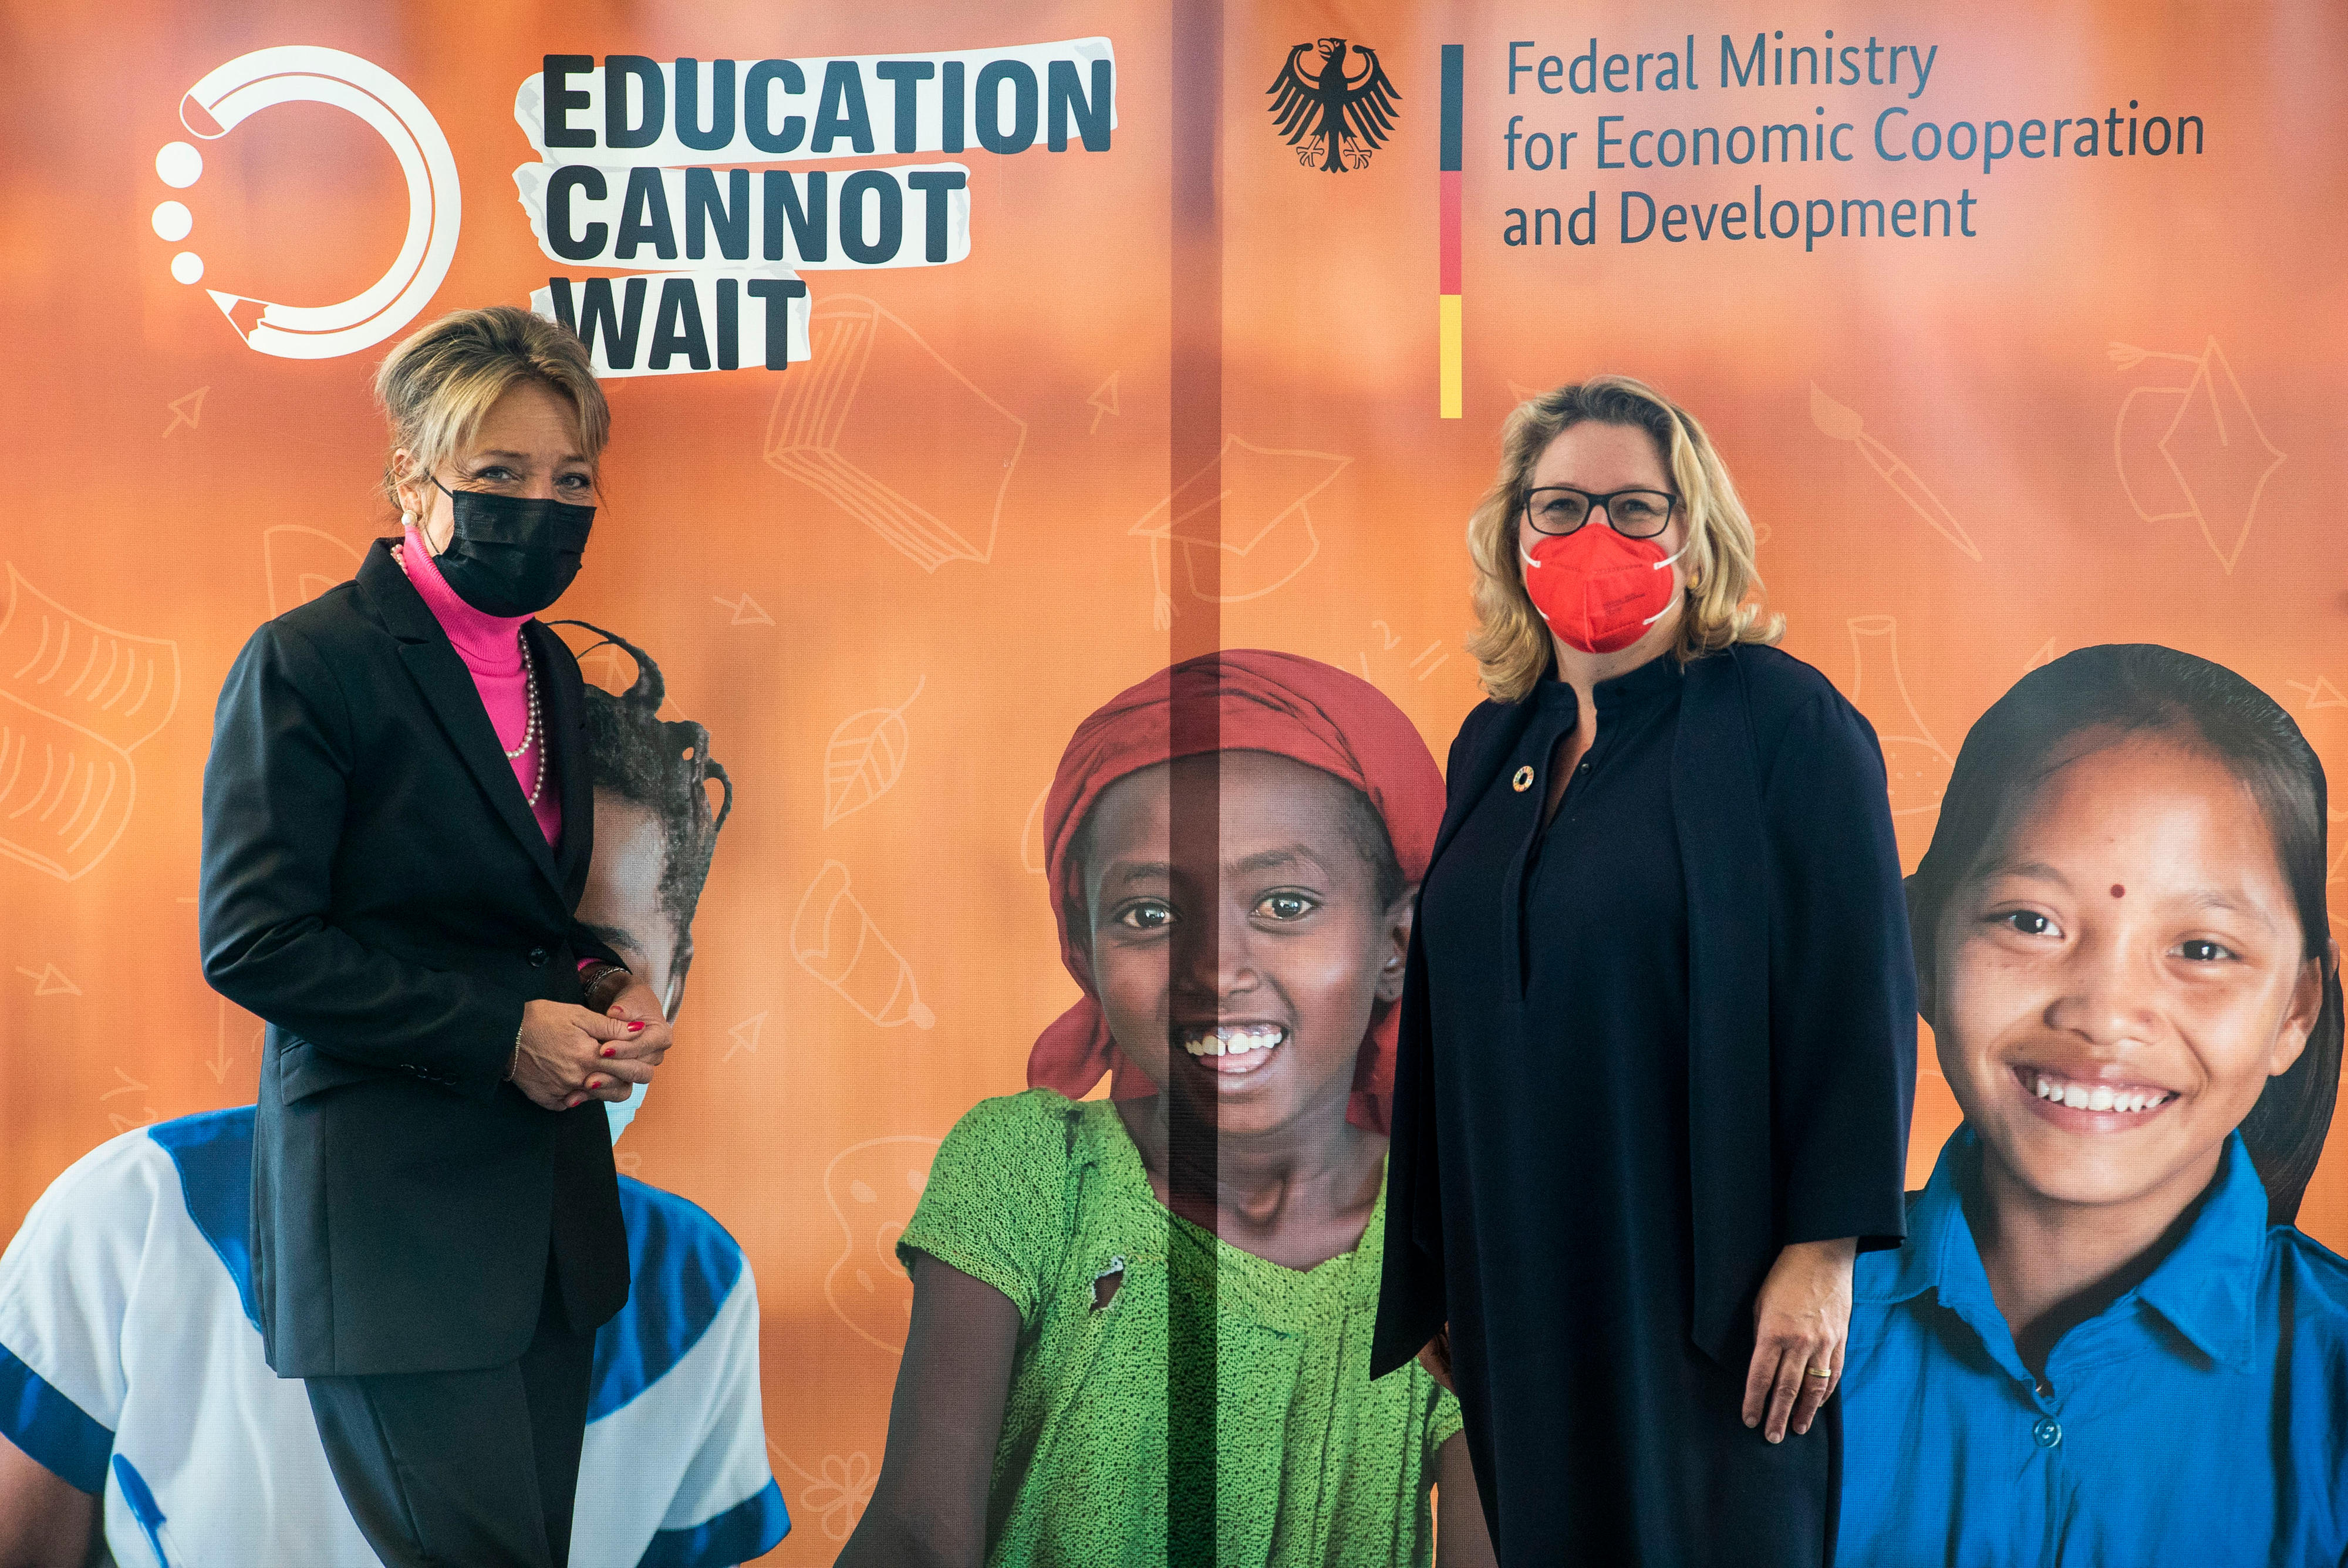 Development Minister Svenja Schulze (right) with Yasmine Sherif (left), Director of Education Cannot Wait, the United Nations global fund for education in emergencies and protracted crises